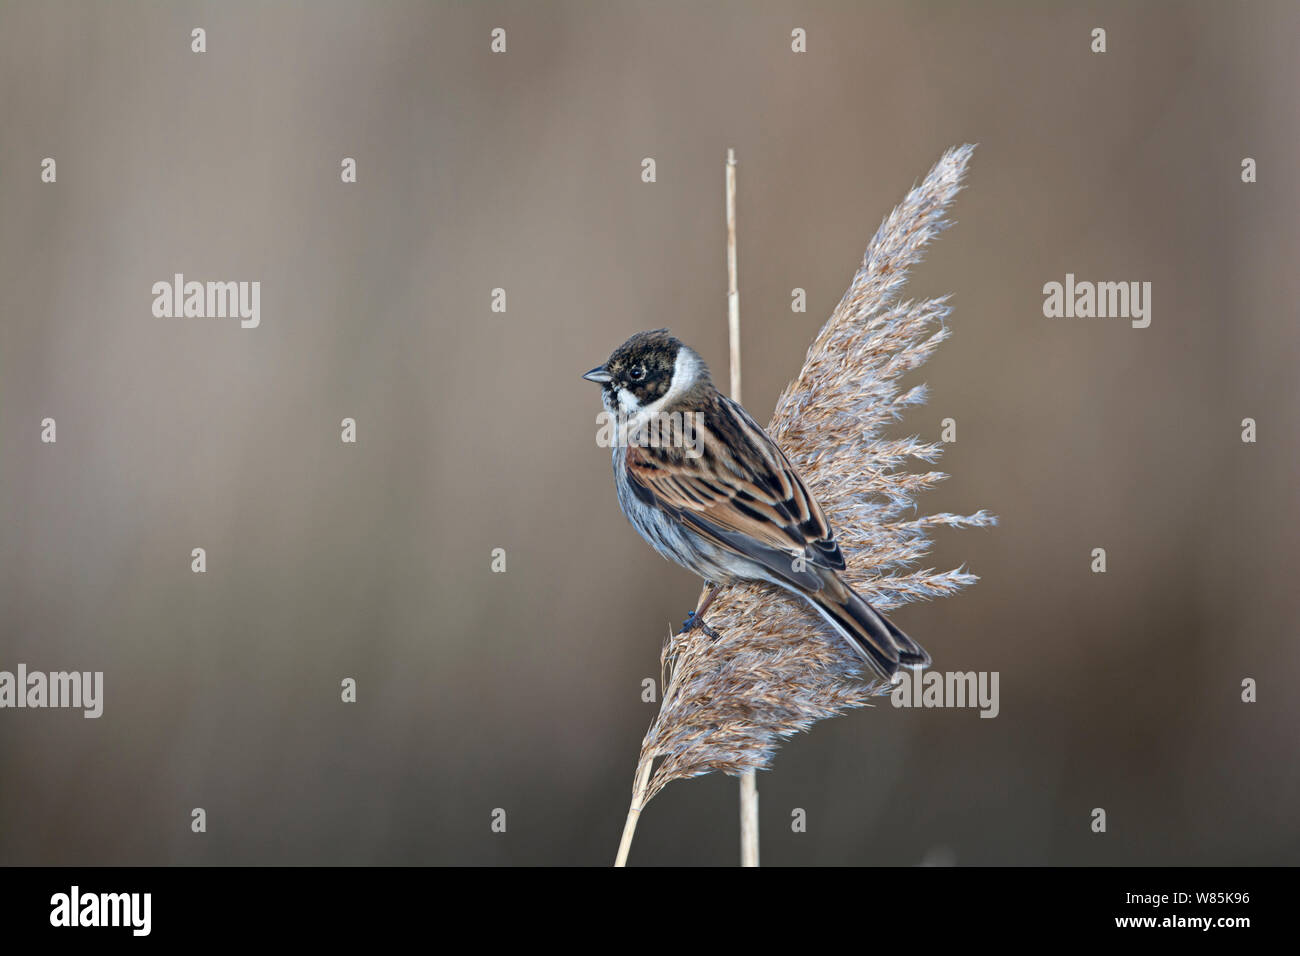 Reed bunting (Emberiza schoeniclus) male coming into breeding plumage, Cley, Norfolk, England, UK, March. Stock Photo